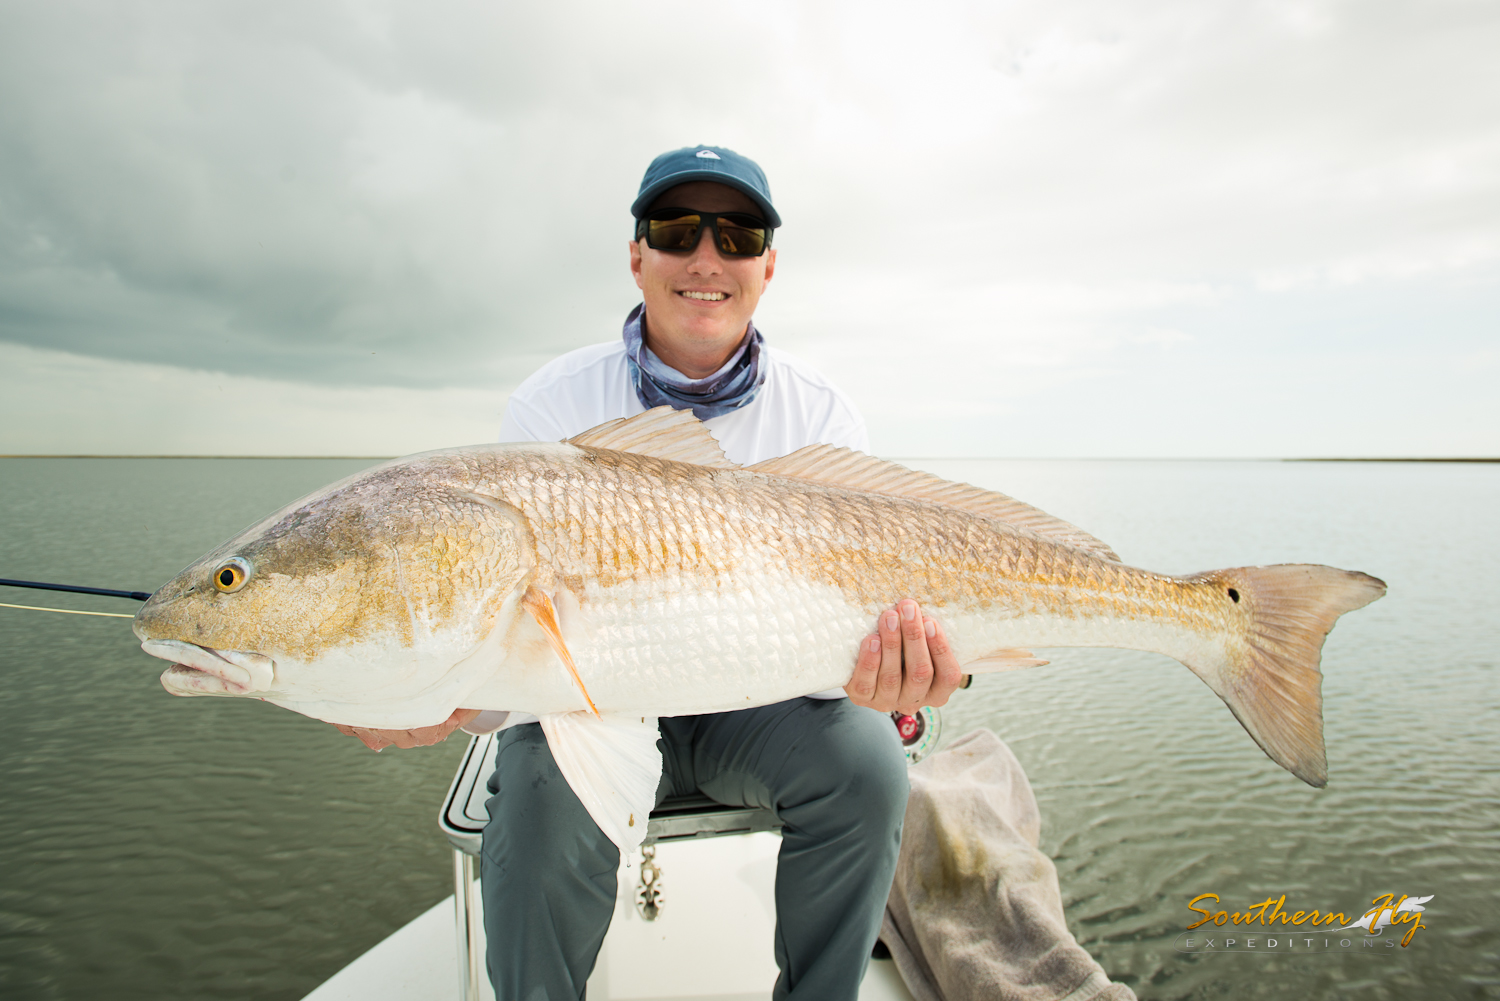 Marsh Fly Fishing Guide Gulf South Southern Fly Expeditions 